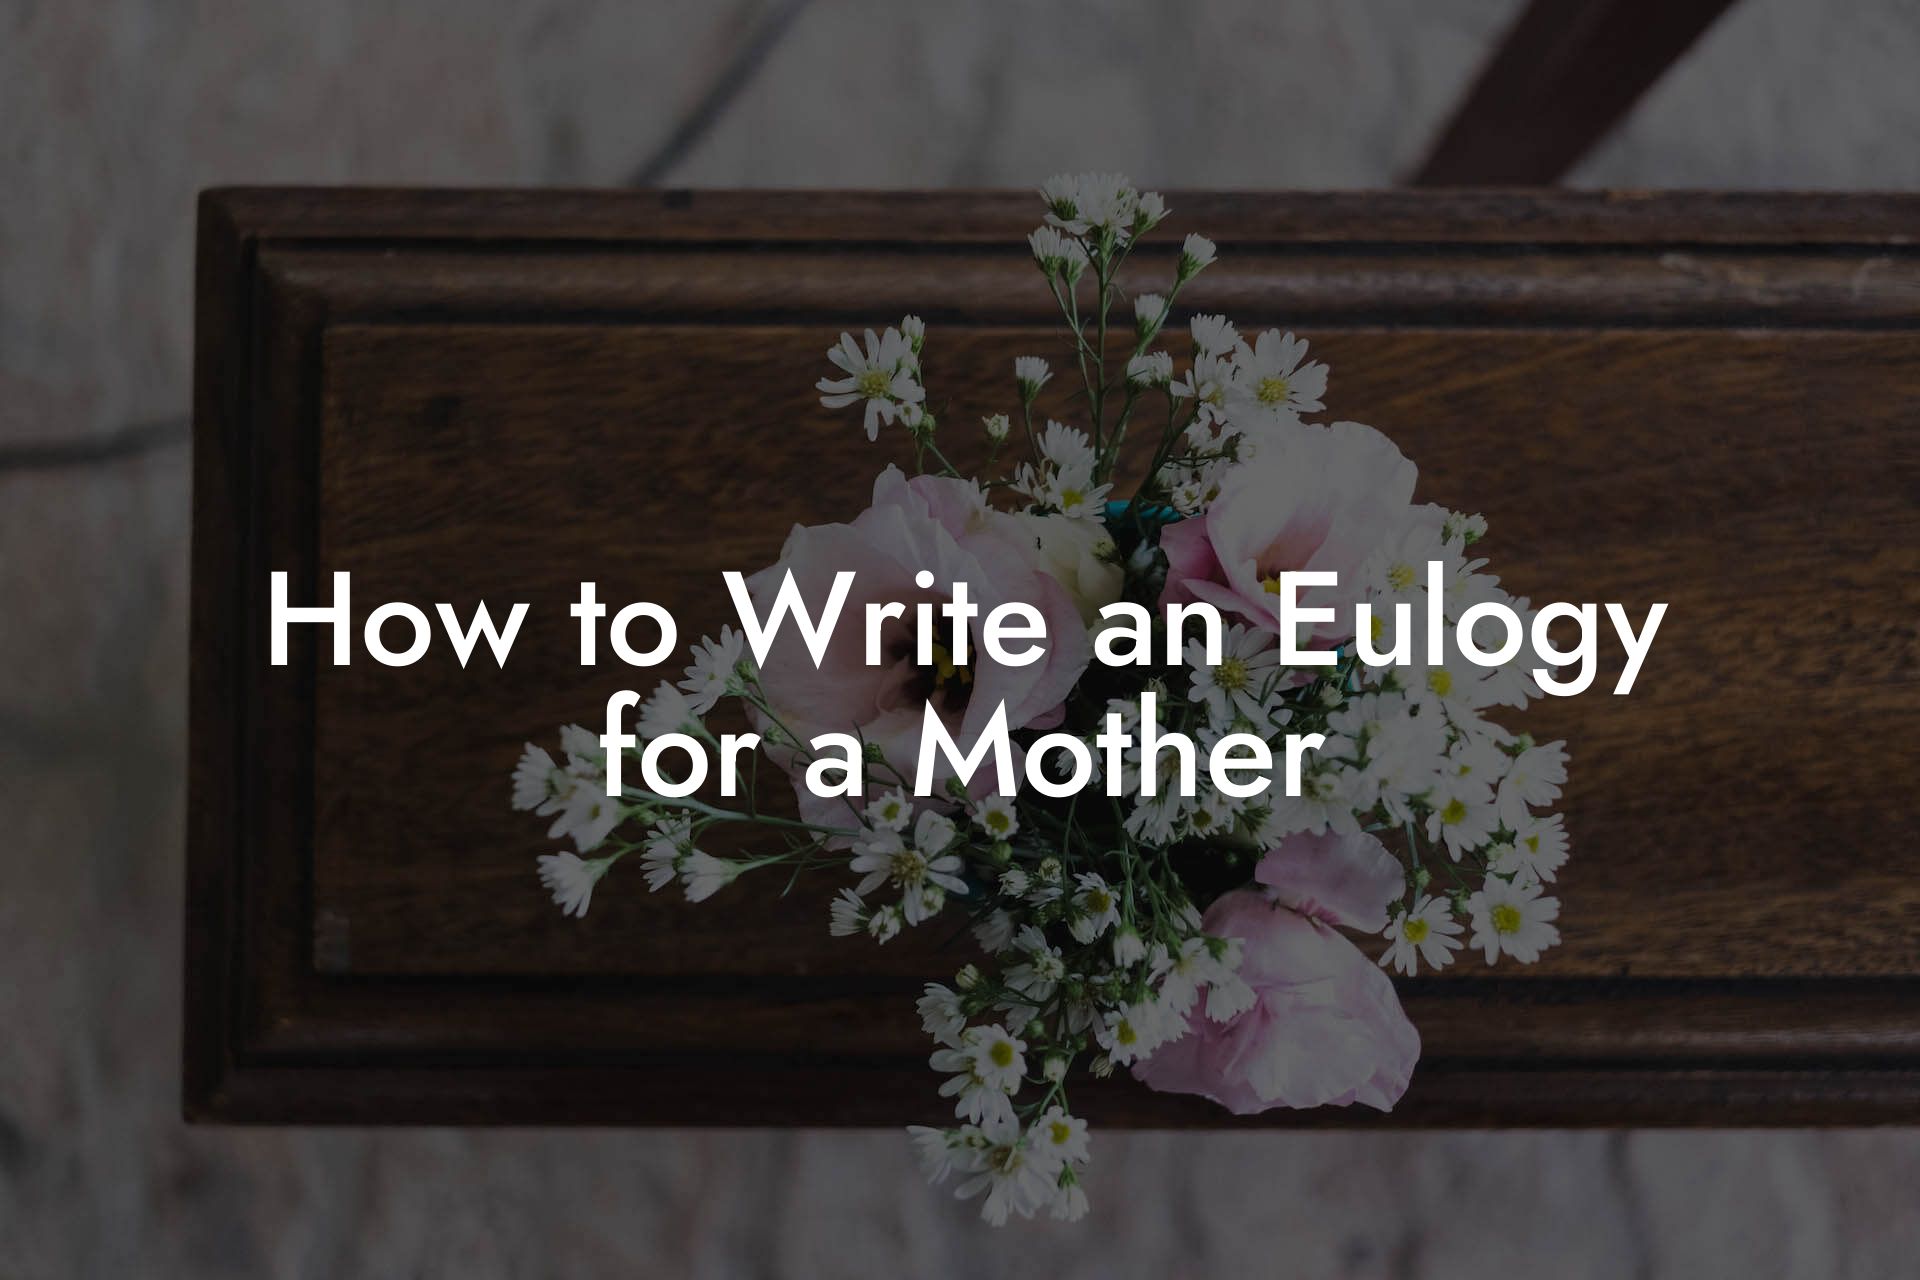 How to Write an Eulogy for a Mother